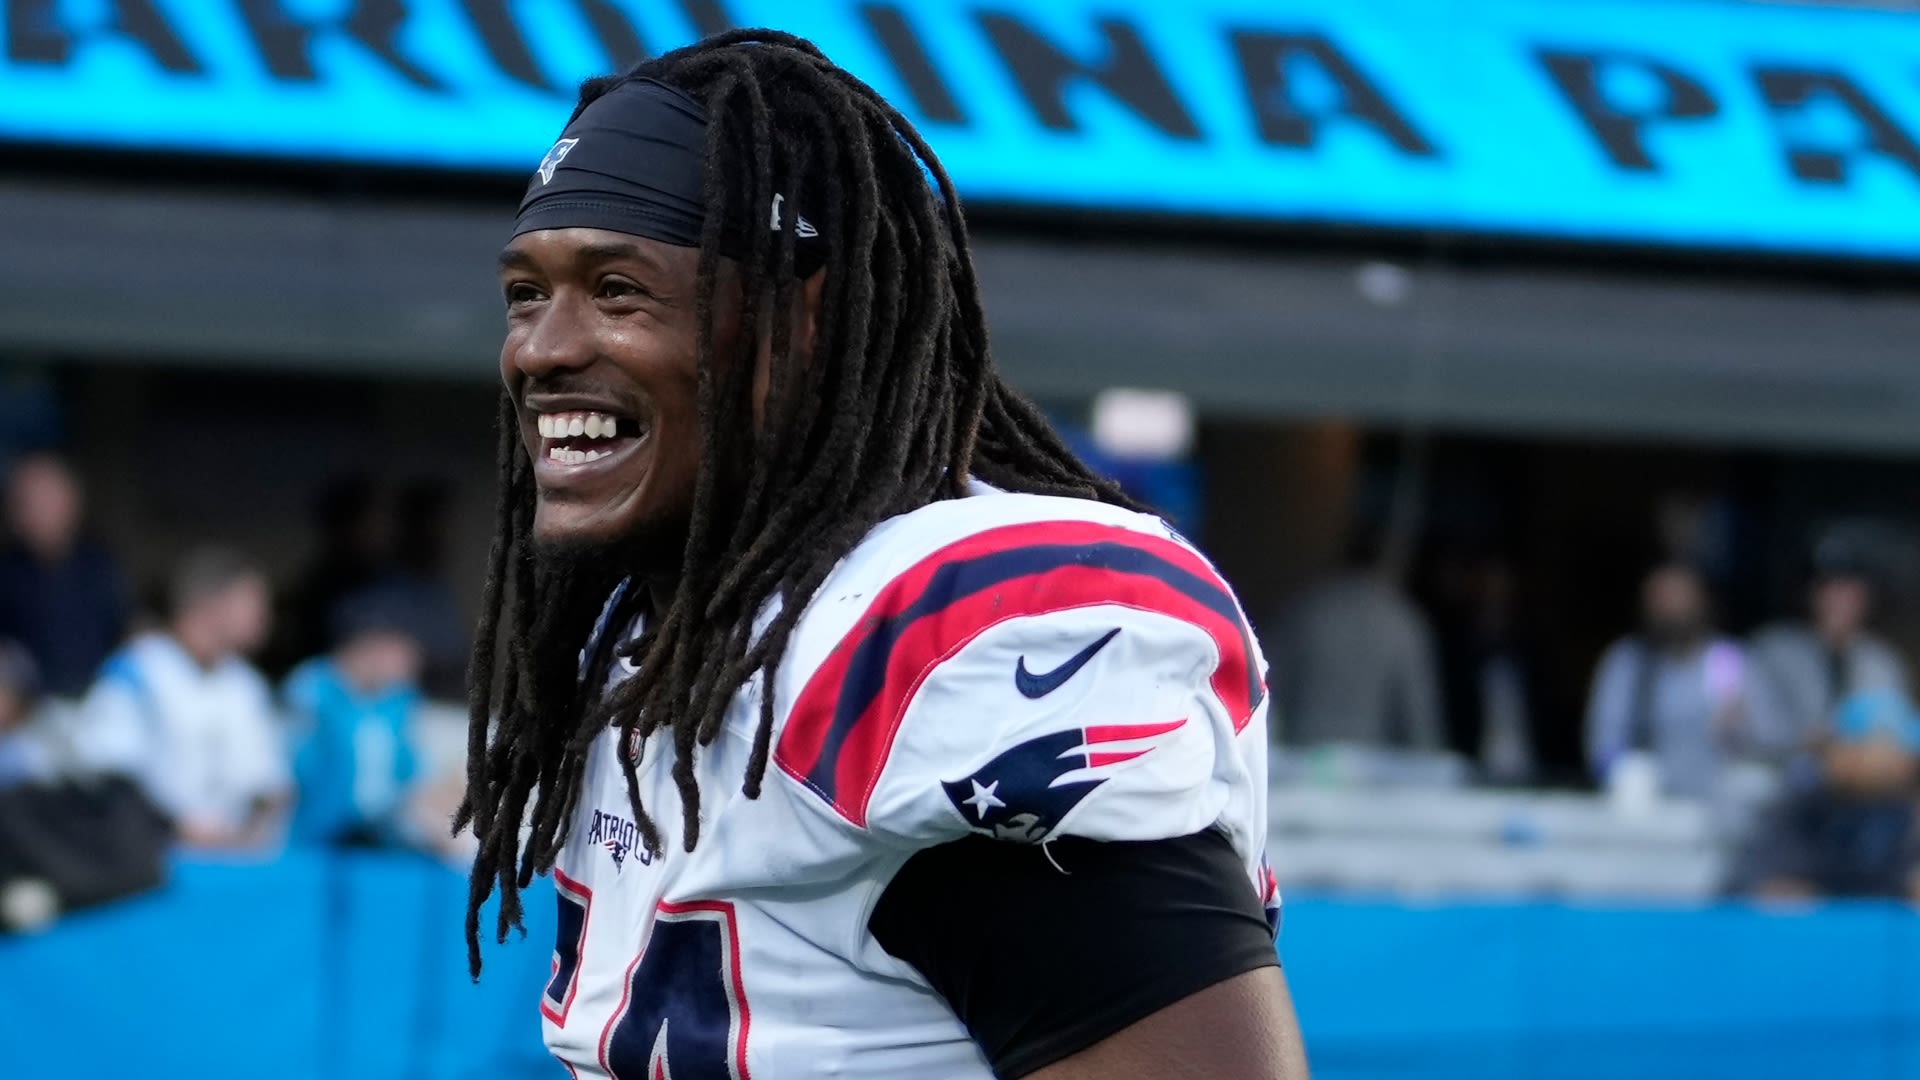 Dont'a Hightower's Return To Patriots Was Only Matter Of Time